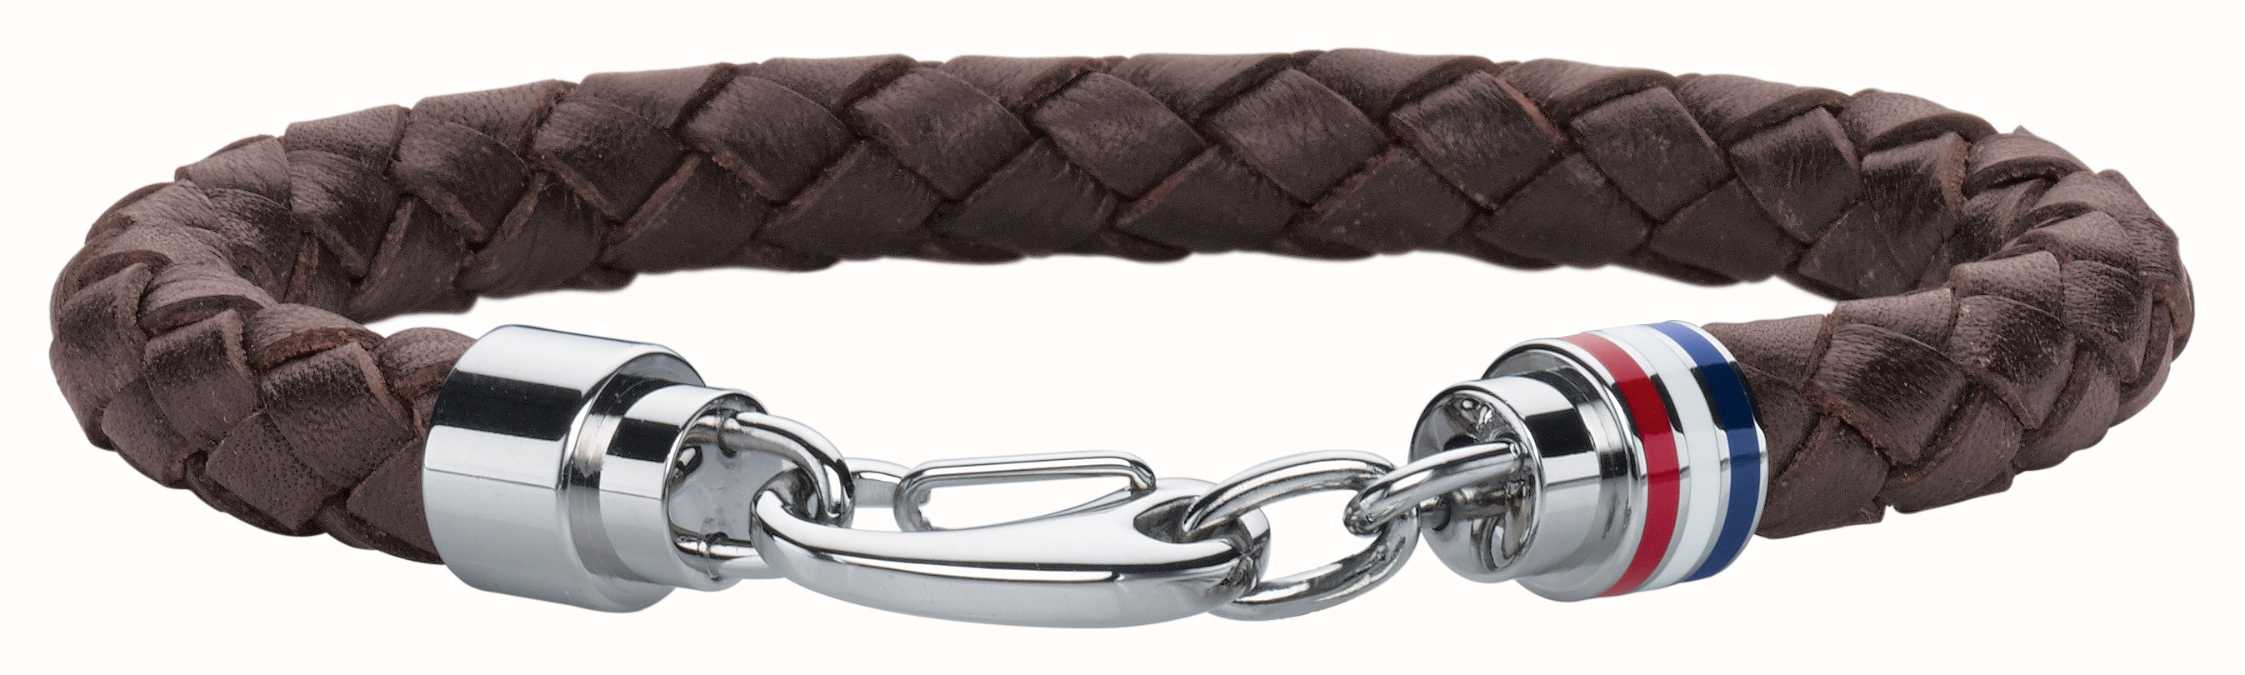 OWS Pakistan on Twitter Tommy Hilfiger Mens Braided Brown Leather  Bracelet Buy Tommy Hilfiger watches online httpstcoBQ8TYCQjMv  Model No 2700530 For more information visit your local OWS store or  contact us through